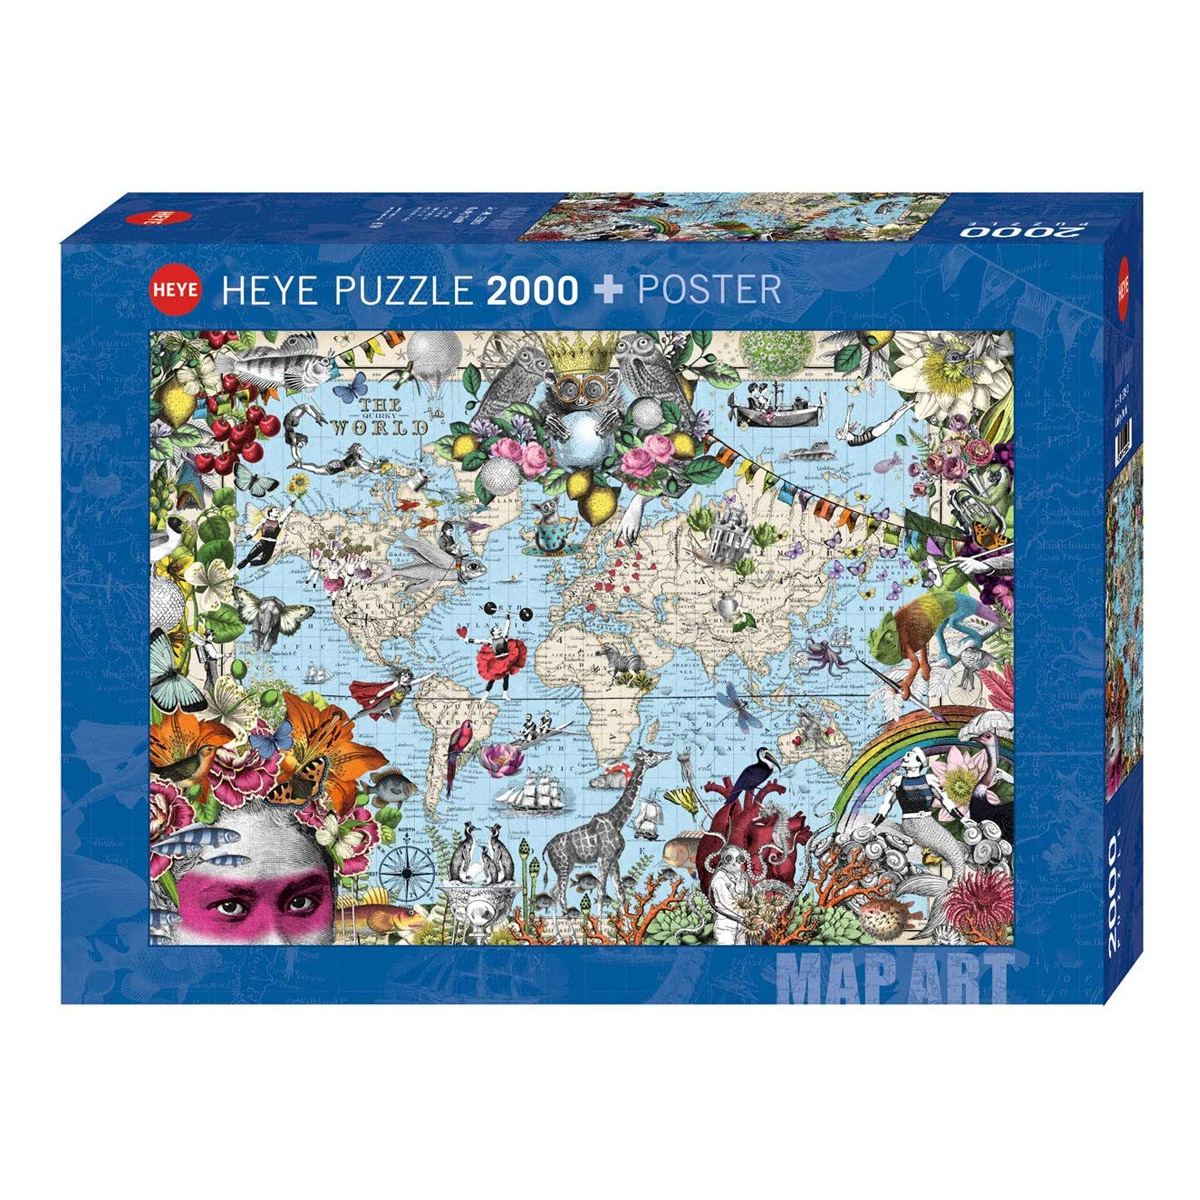  Ravensburger Disney Museum 9000 Piece Jigsaw Puzzle for Adults  - 14973 - Handcrafted Tooling, Durable Blueboard, Every Piece Fits Together  Perfectly, 76 x 54 : Toys & Games